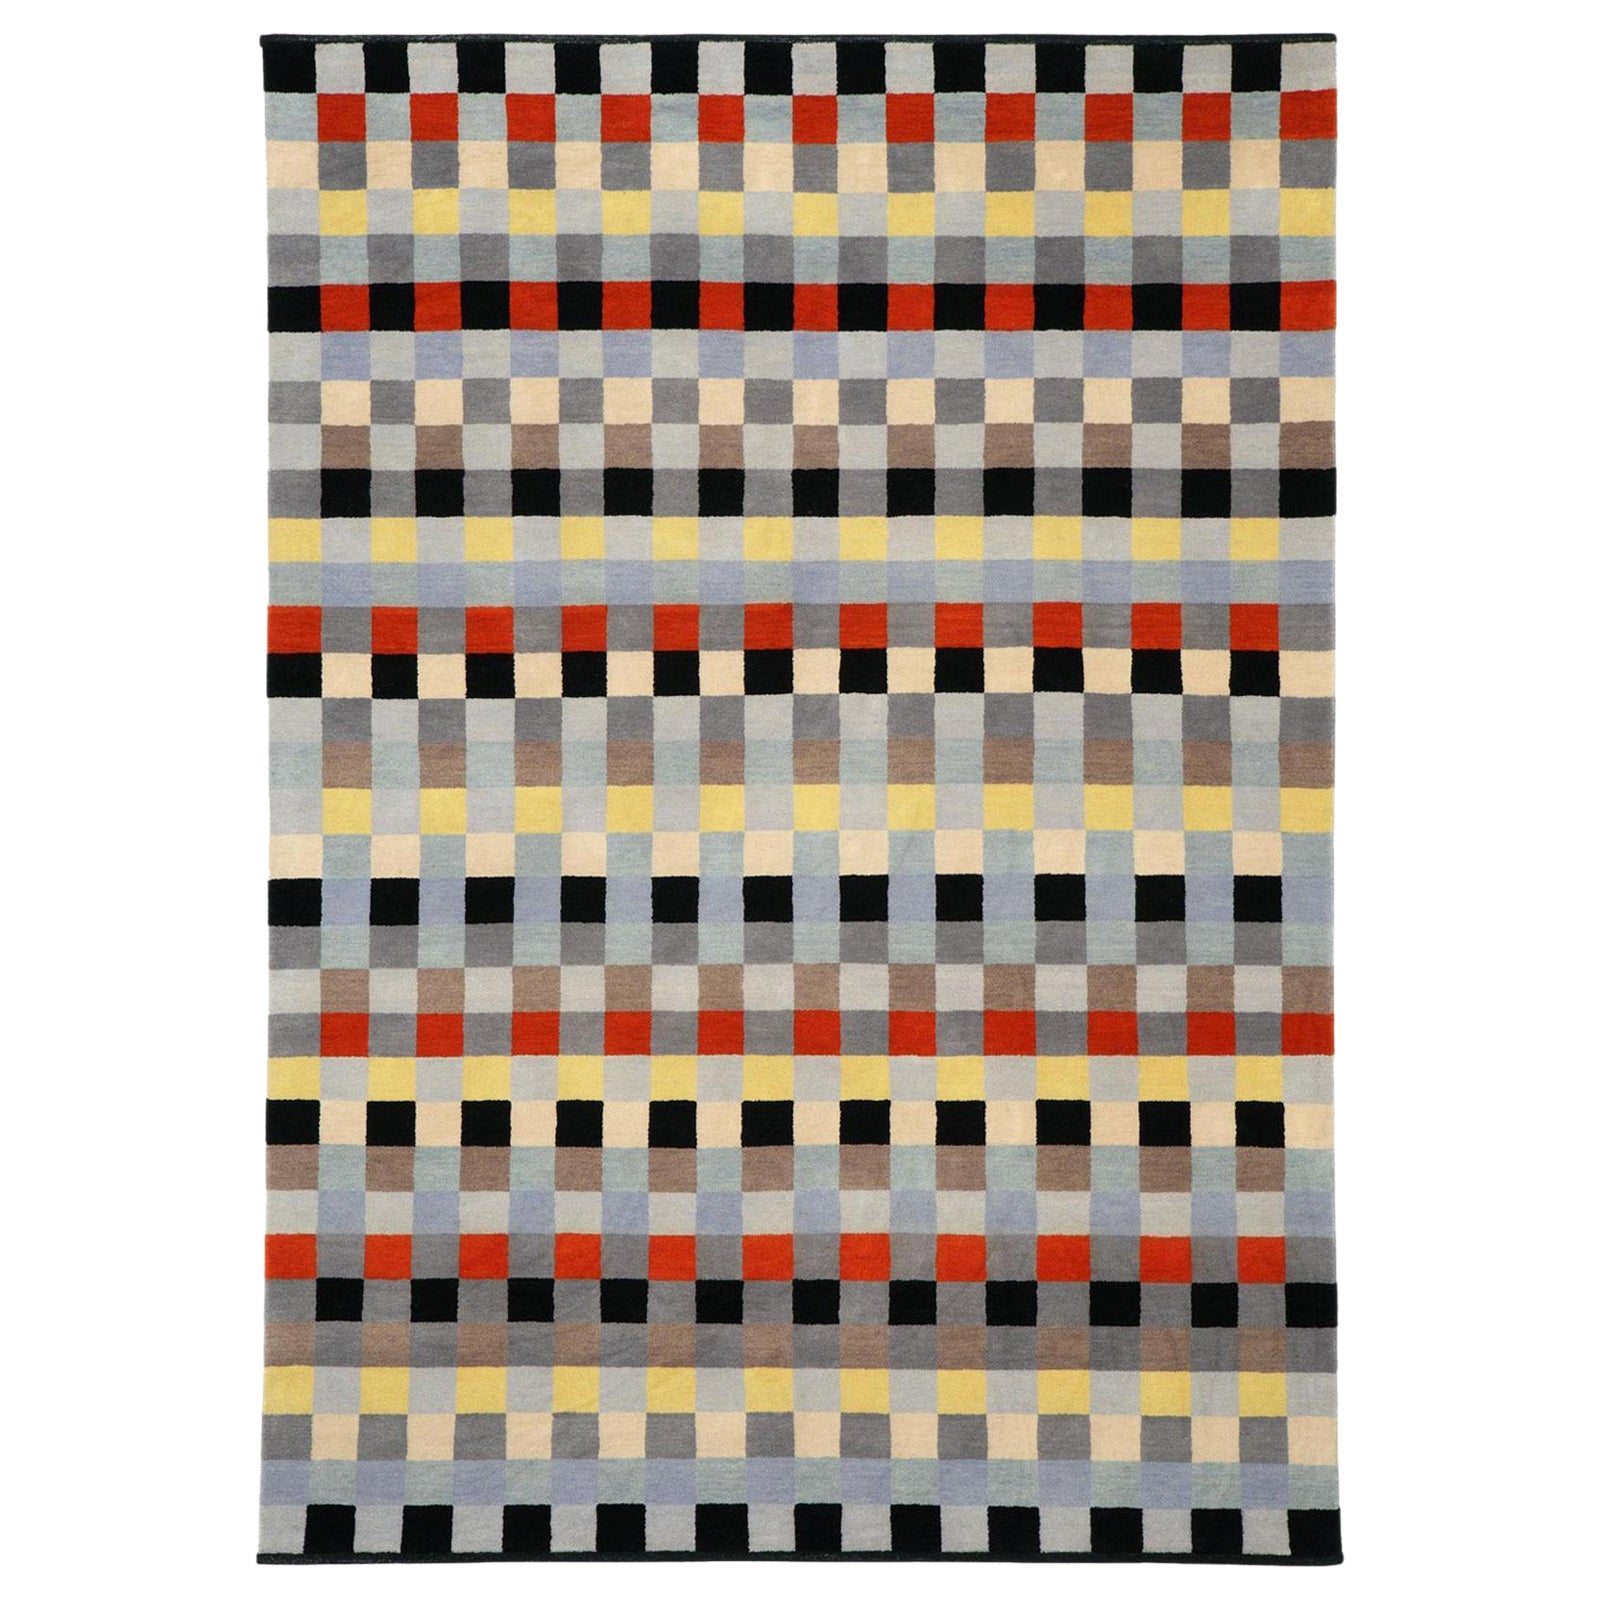 Small Child's Room Rug by Anni Albers For Sale